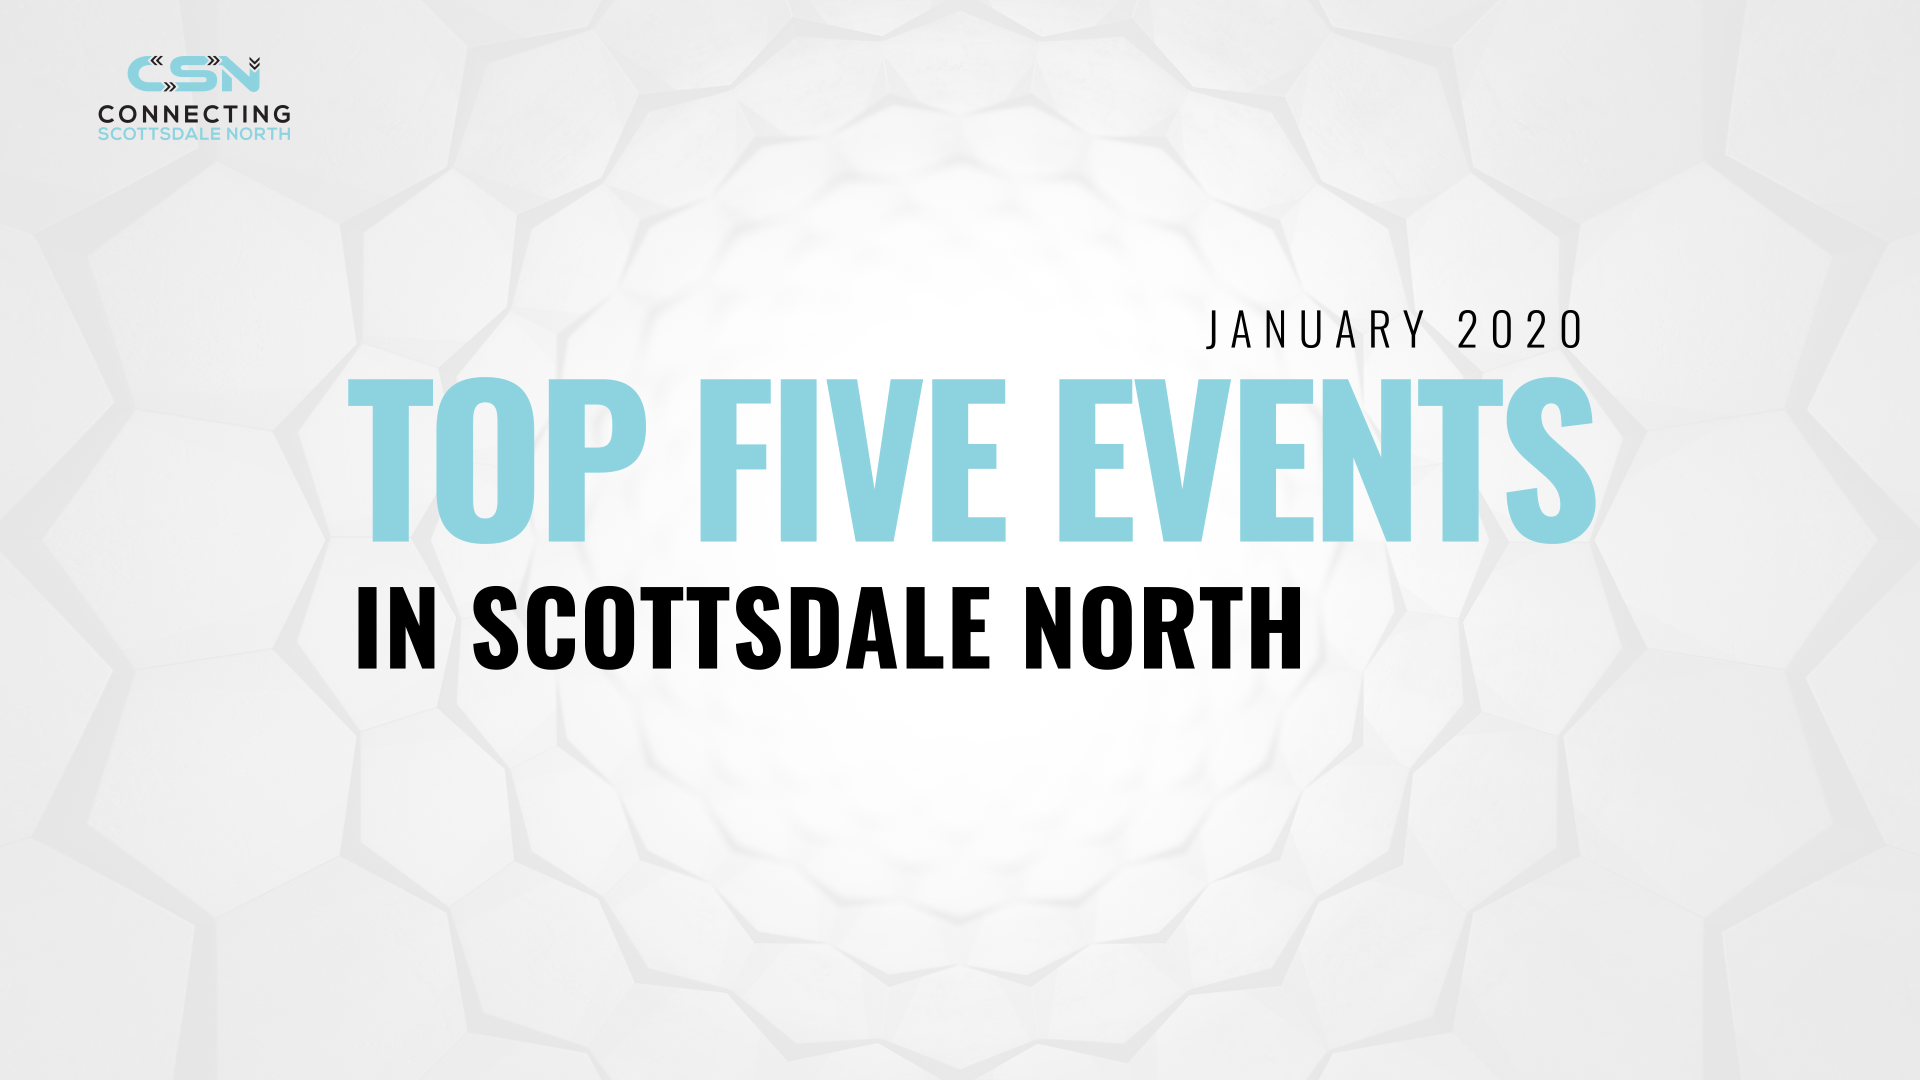 Scottsdale North Events January 2020